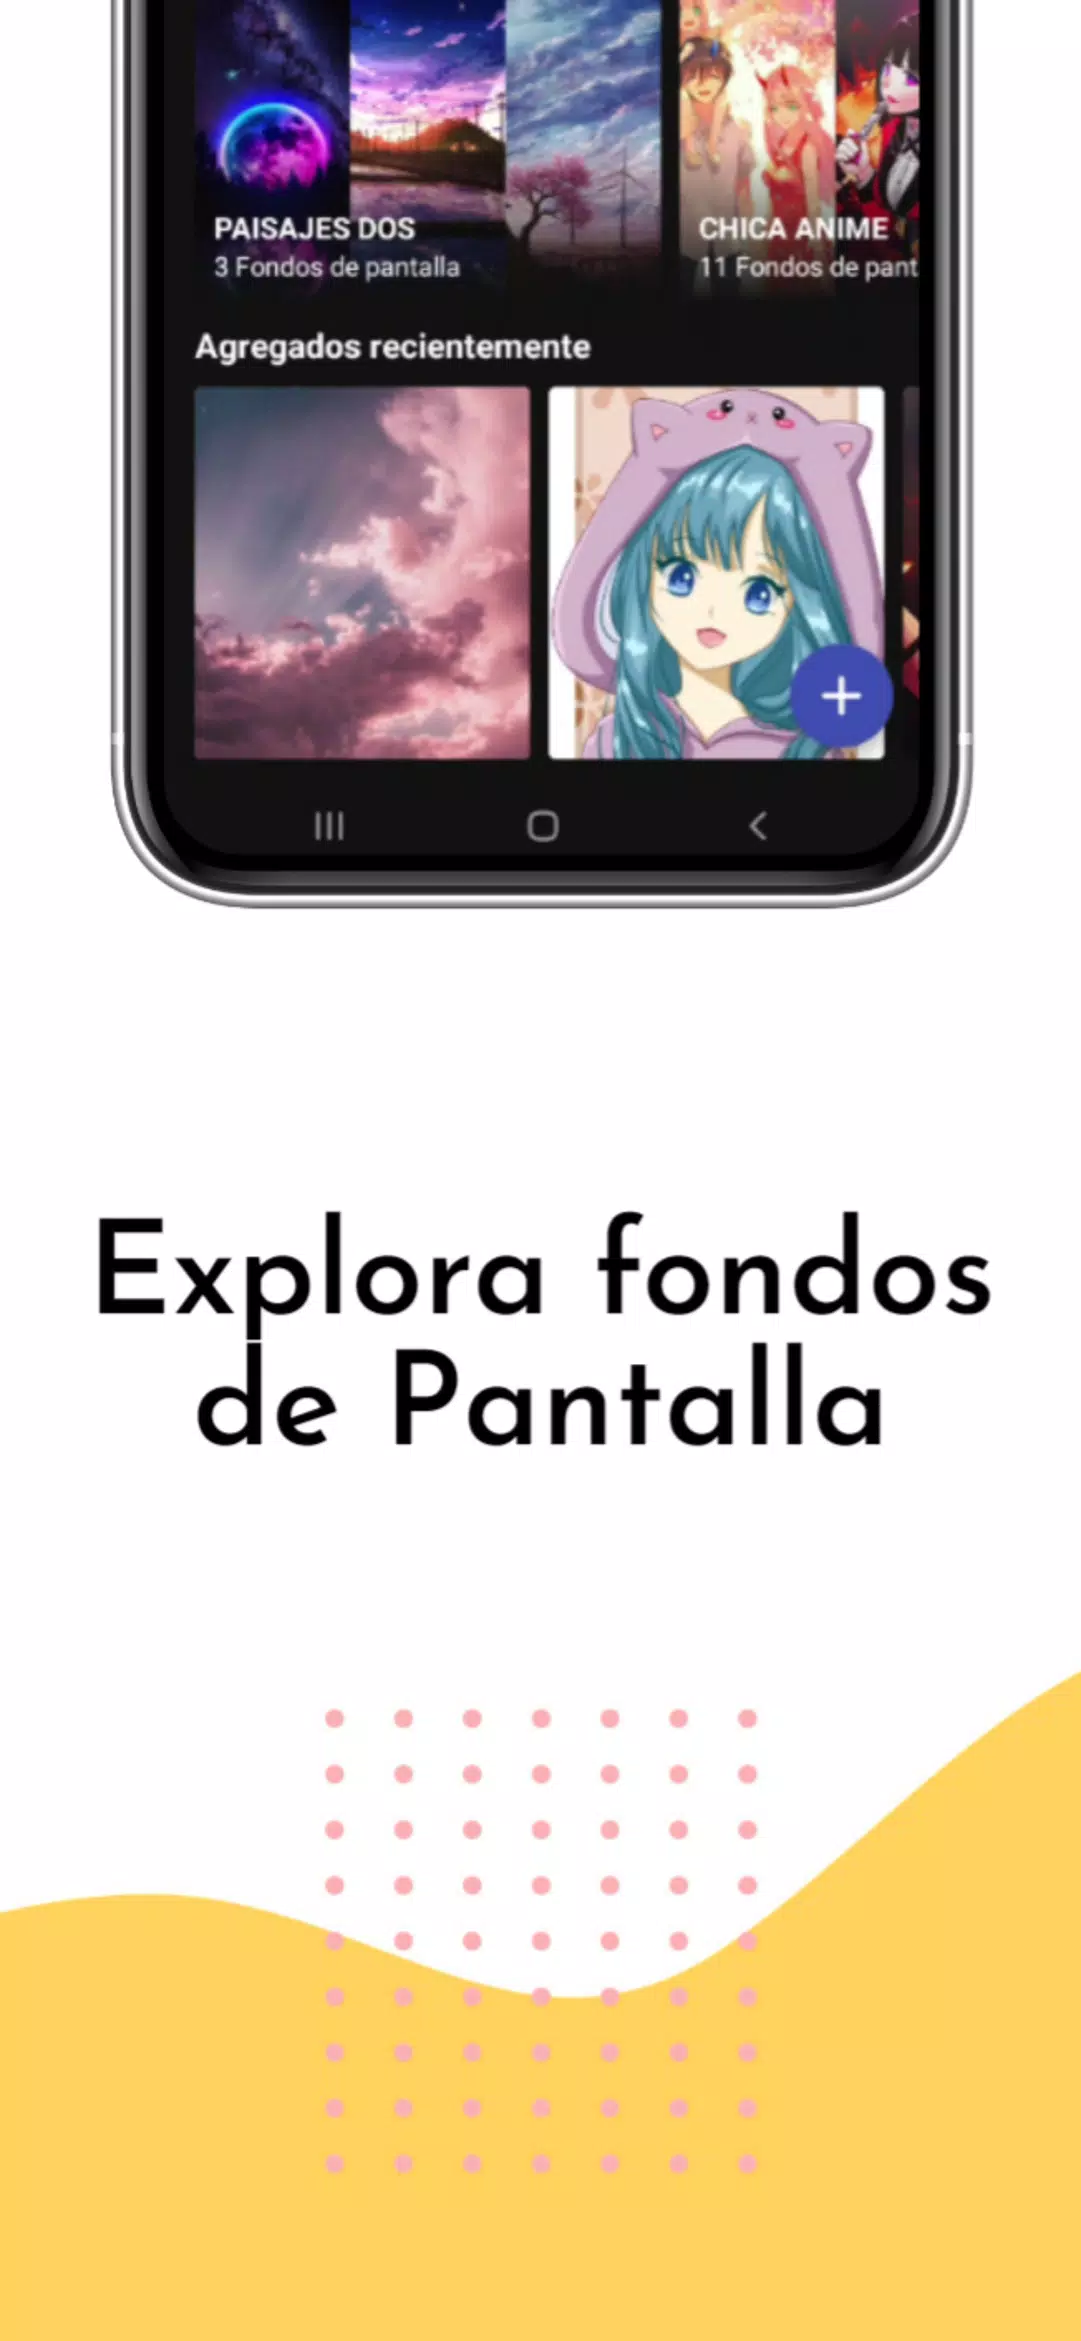 Pato Anime Latino for Android - Free App Download